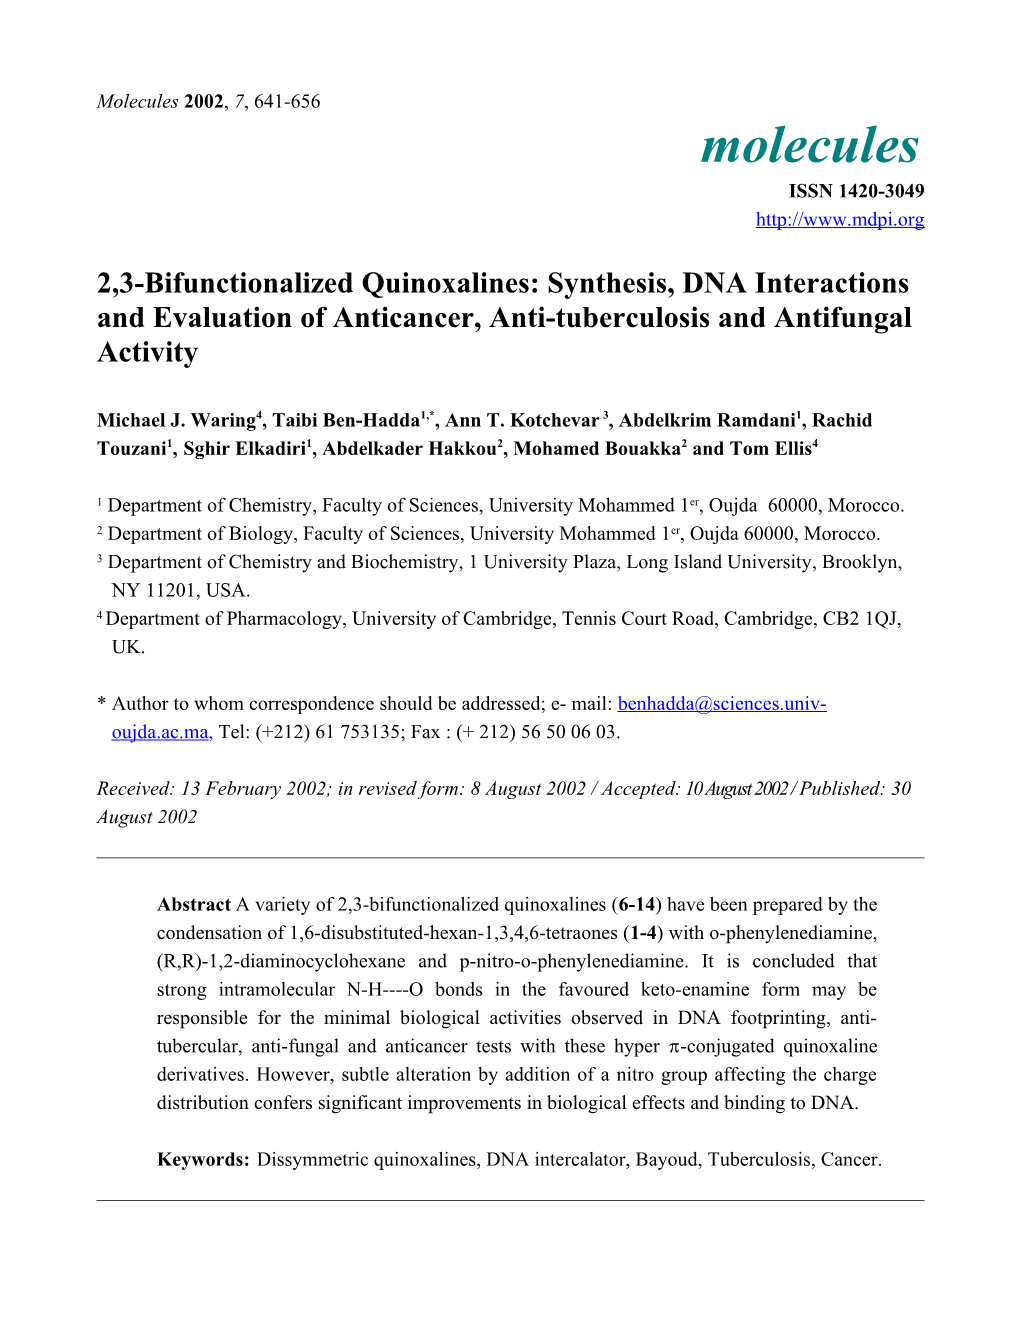 2,3-Bifunctionalized Quinoxalines: Synthesis, DNA Interactions and Evaluation of Anticancer